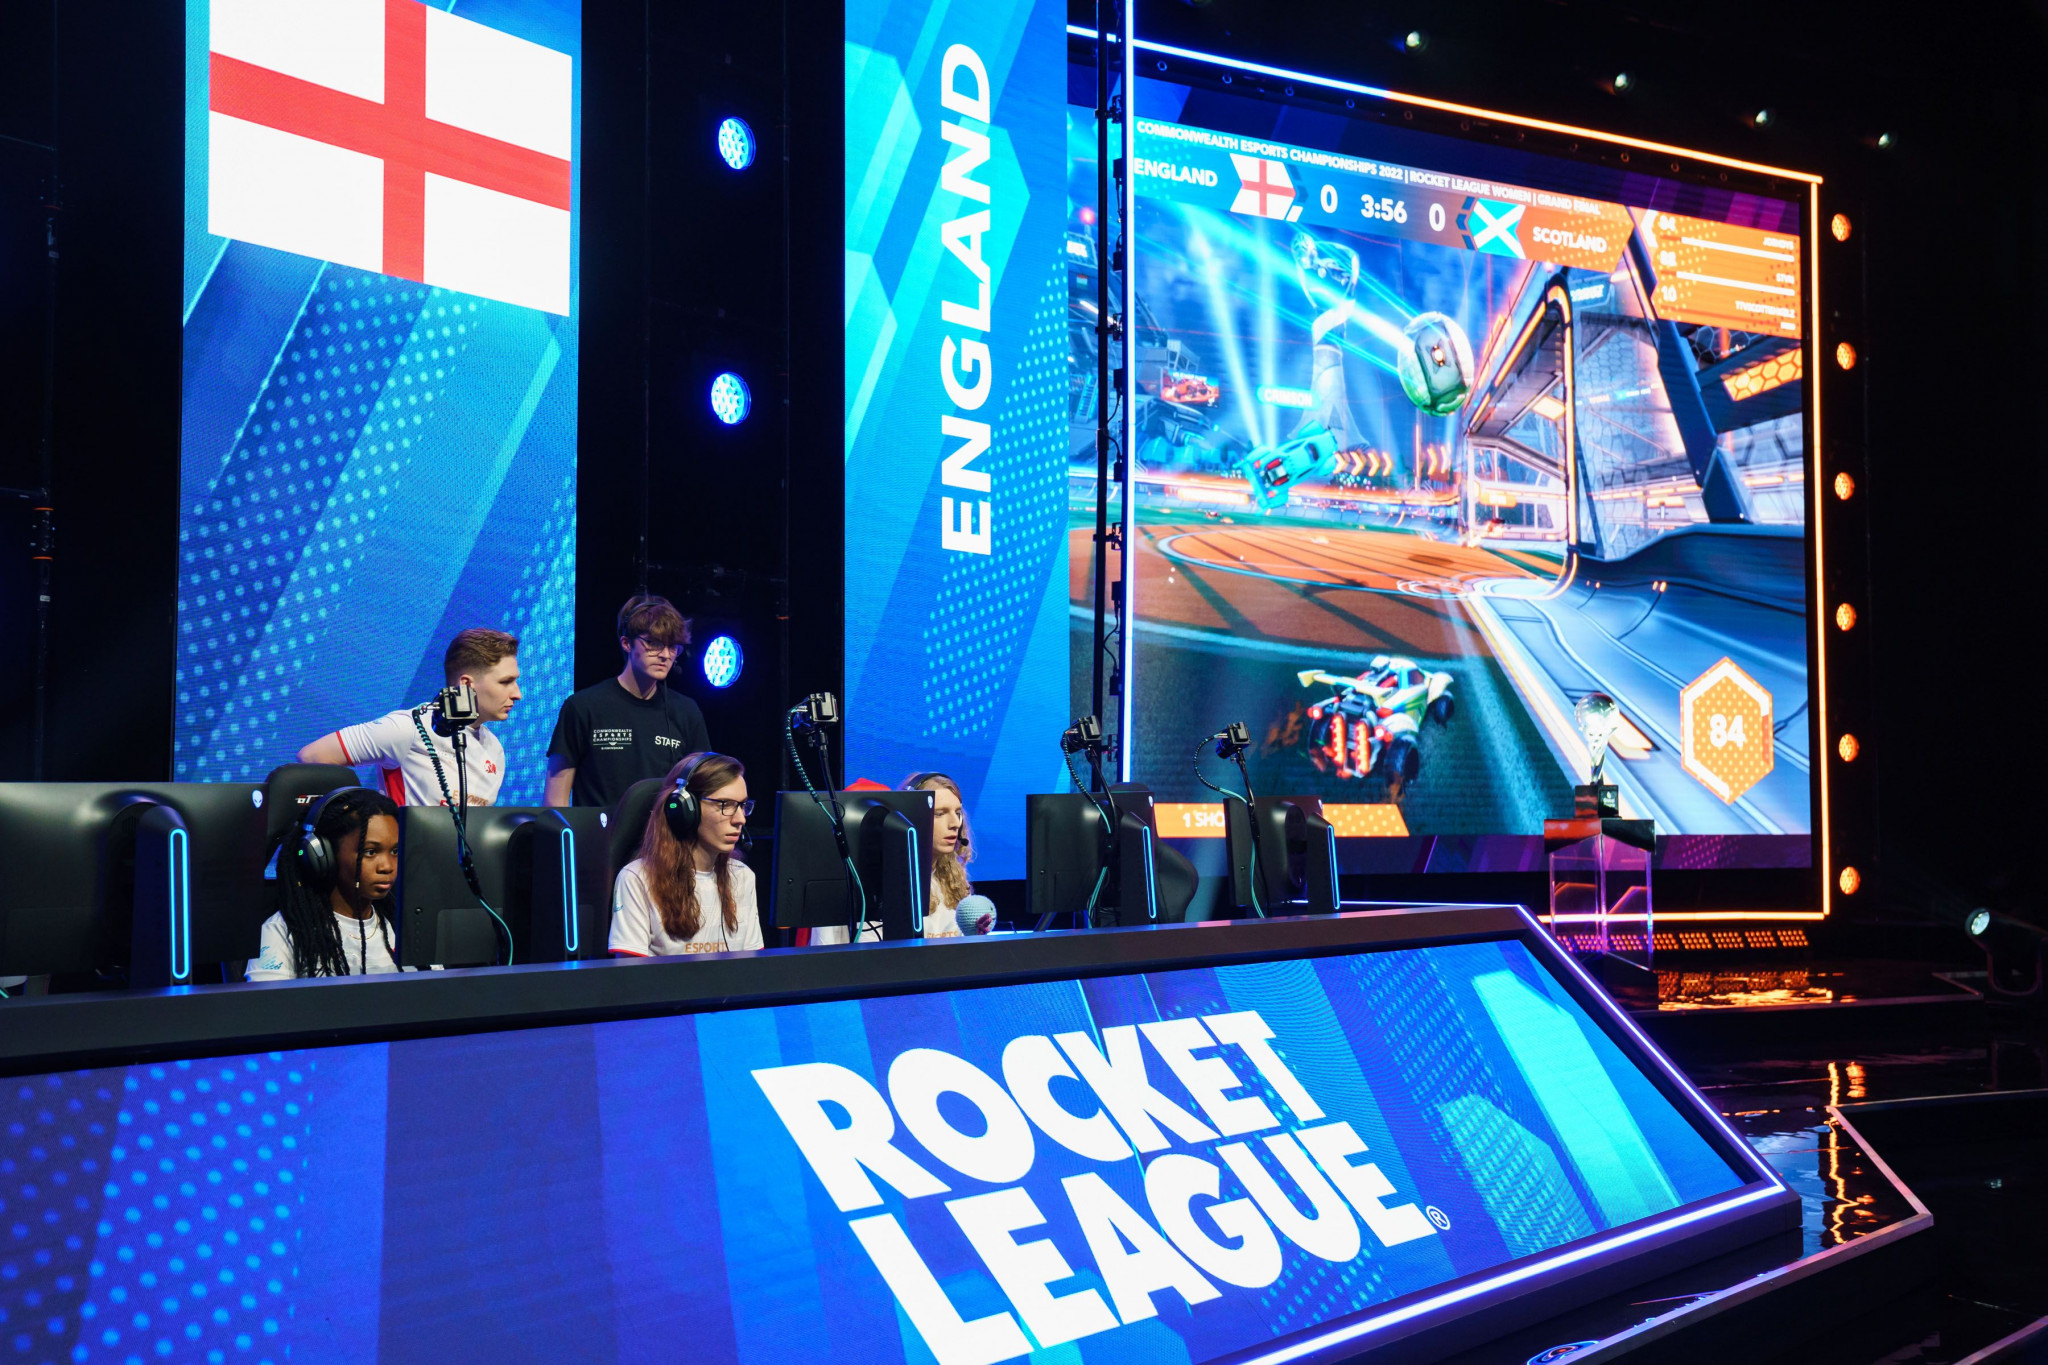 England deliver home gold at Commonwealth Esports Championships in Birmingham